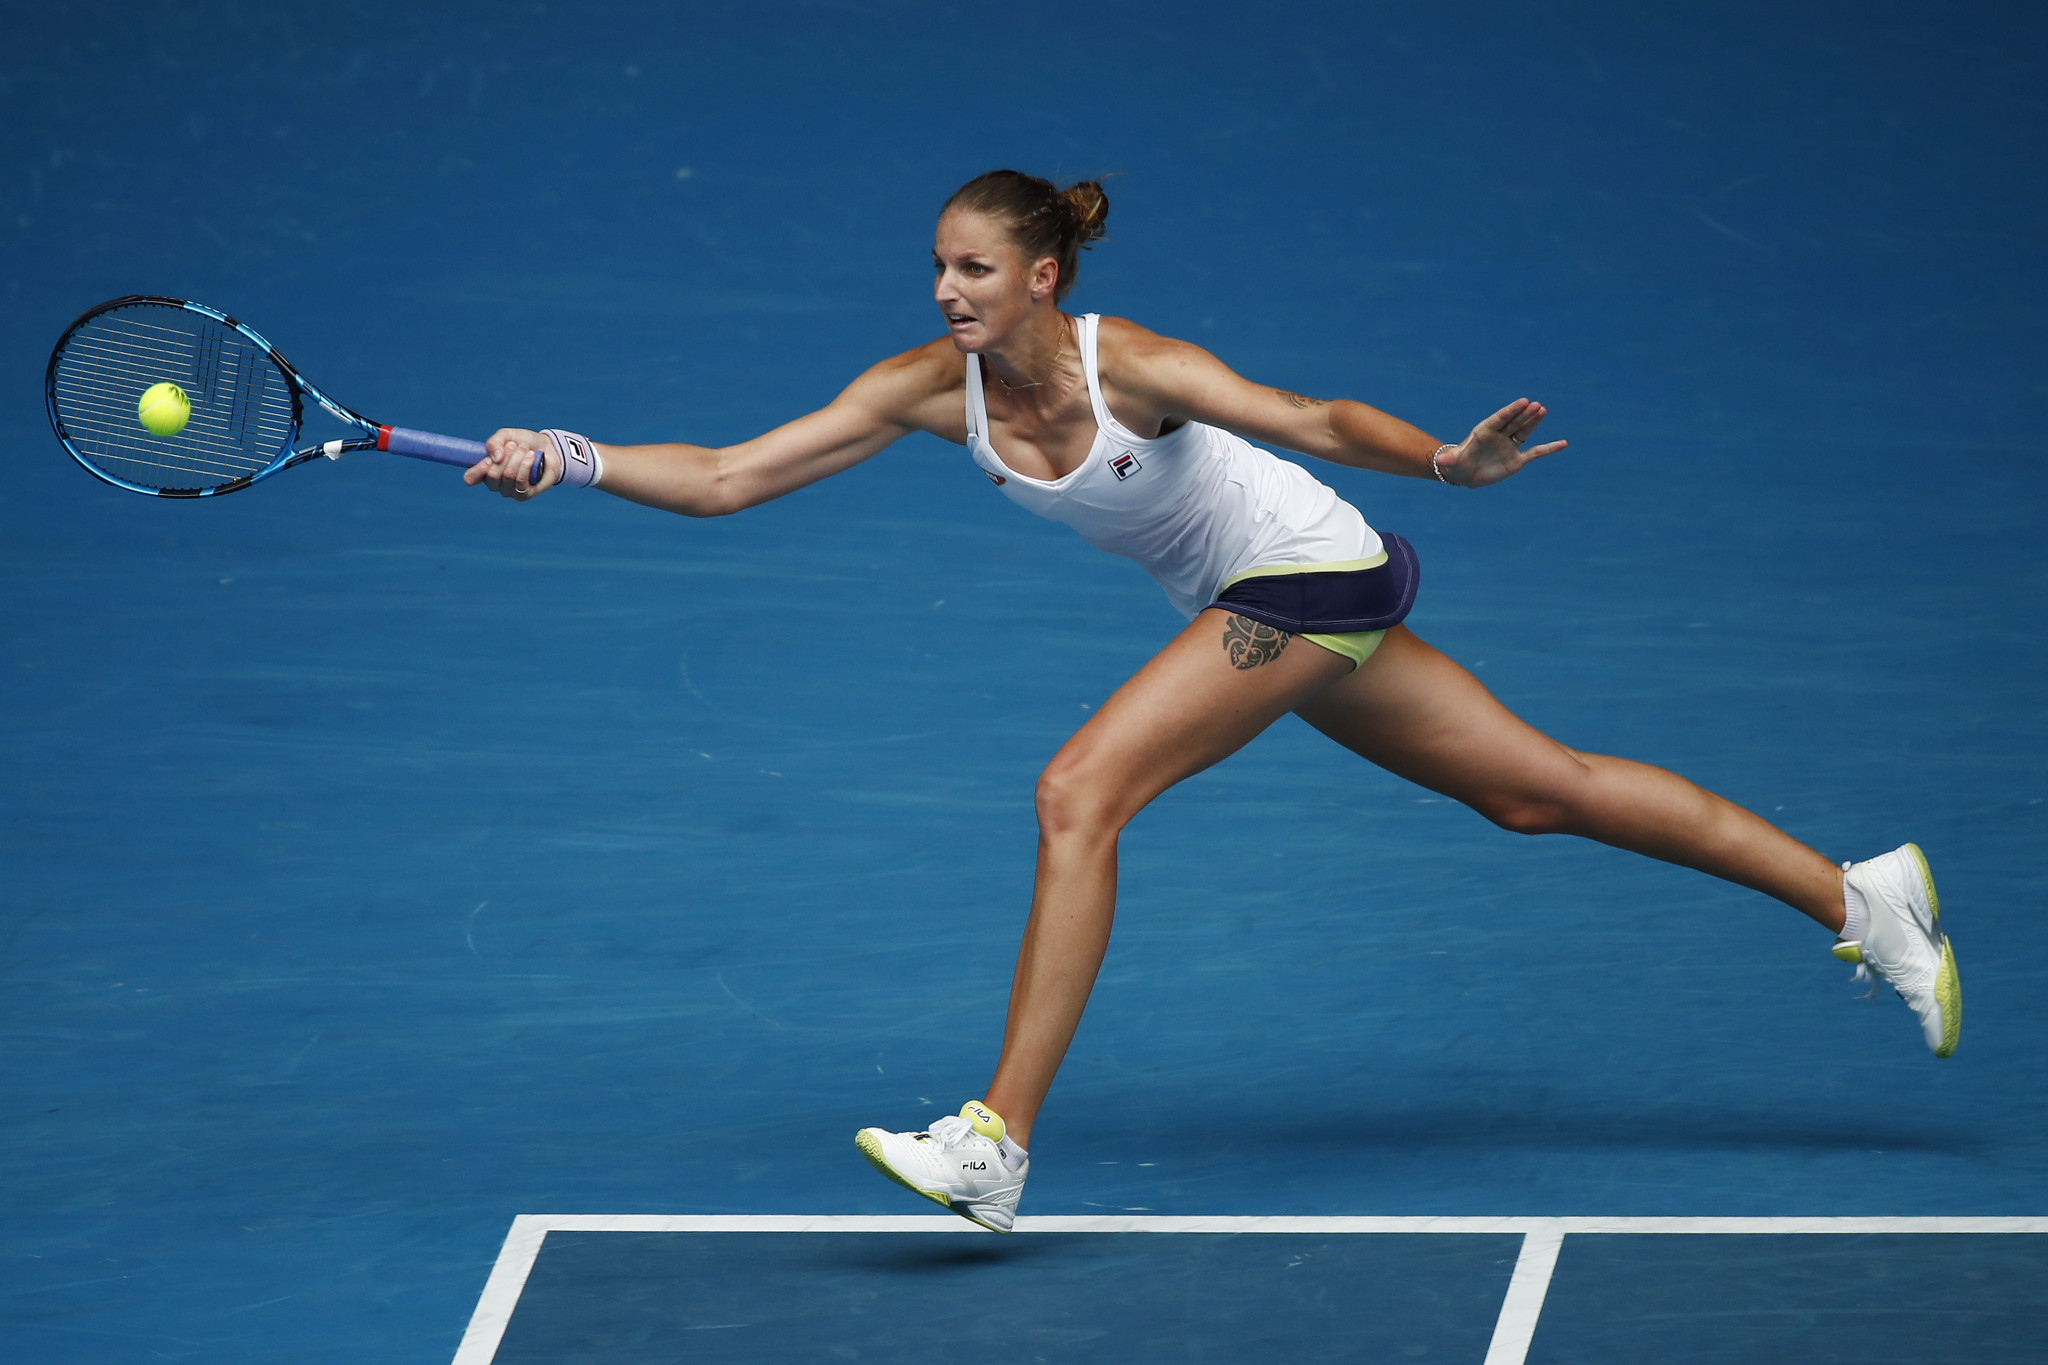 Plíšková suffers third-round exit as Barty and Nadal advance at Australian Open